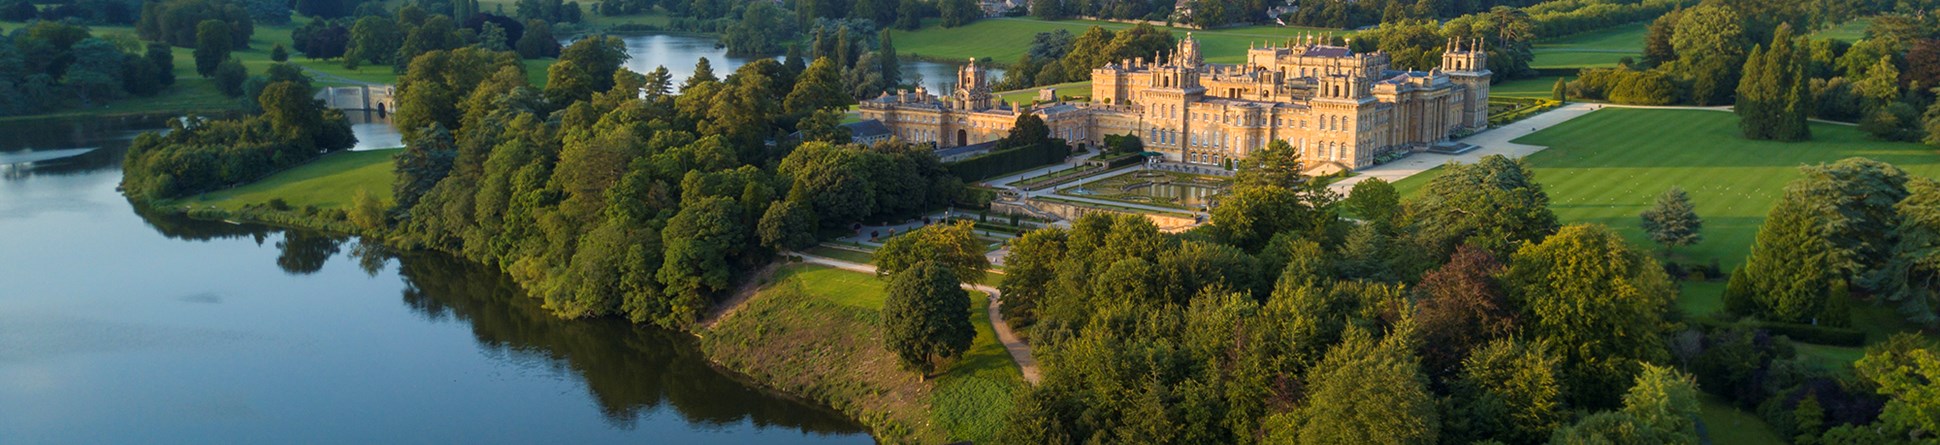 Aerial view of Blenheim Palace and gardens, Woodstock, Oxfordshire